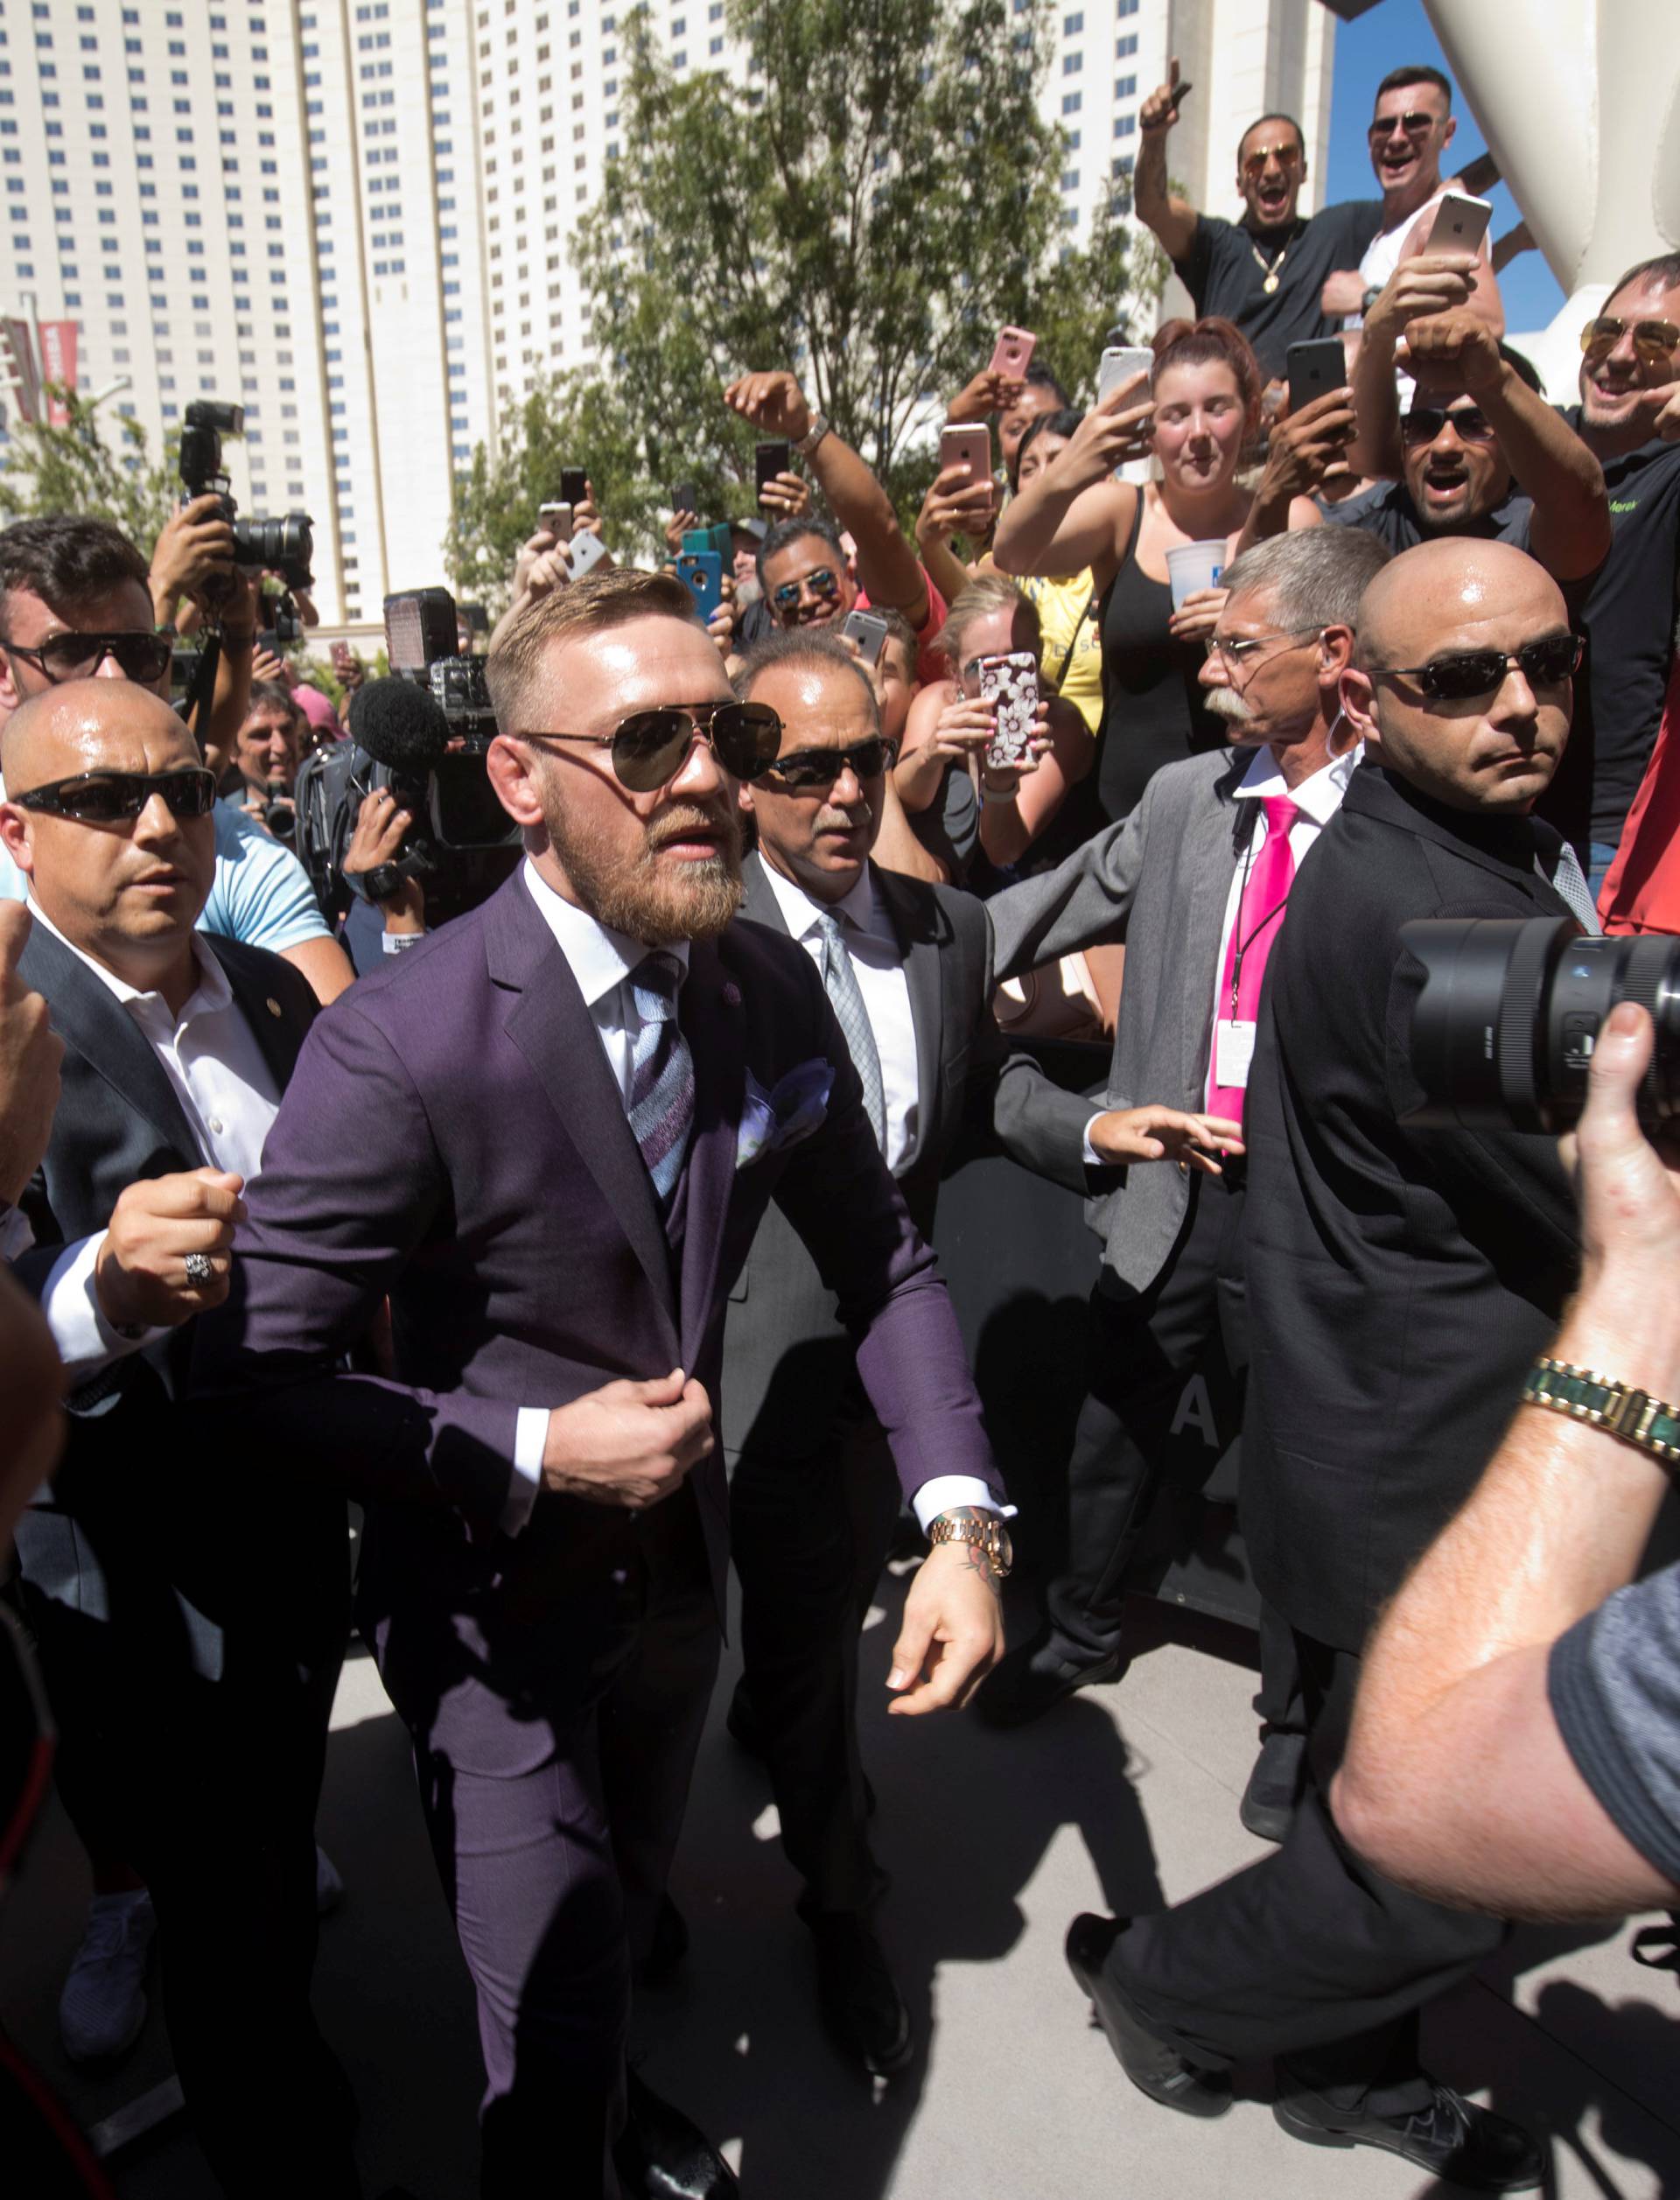 UFC lightweight champion Conor McGregor of Ireland greets fans as he arrives at Toshiba Plaza in Las Vegas